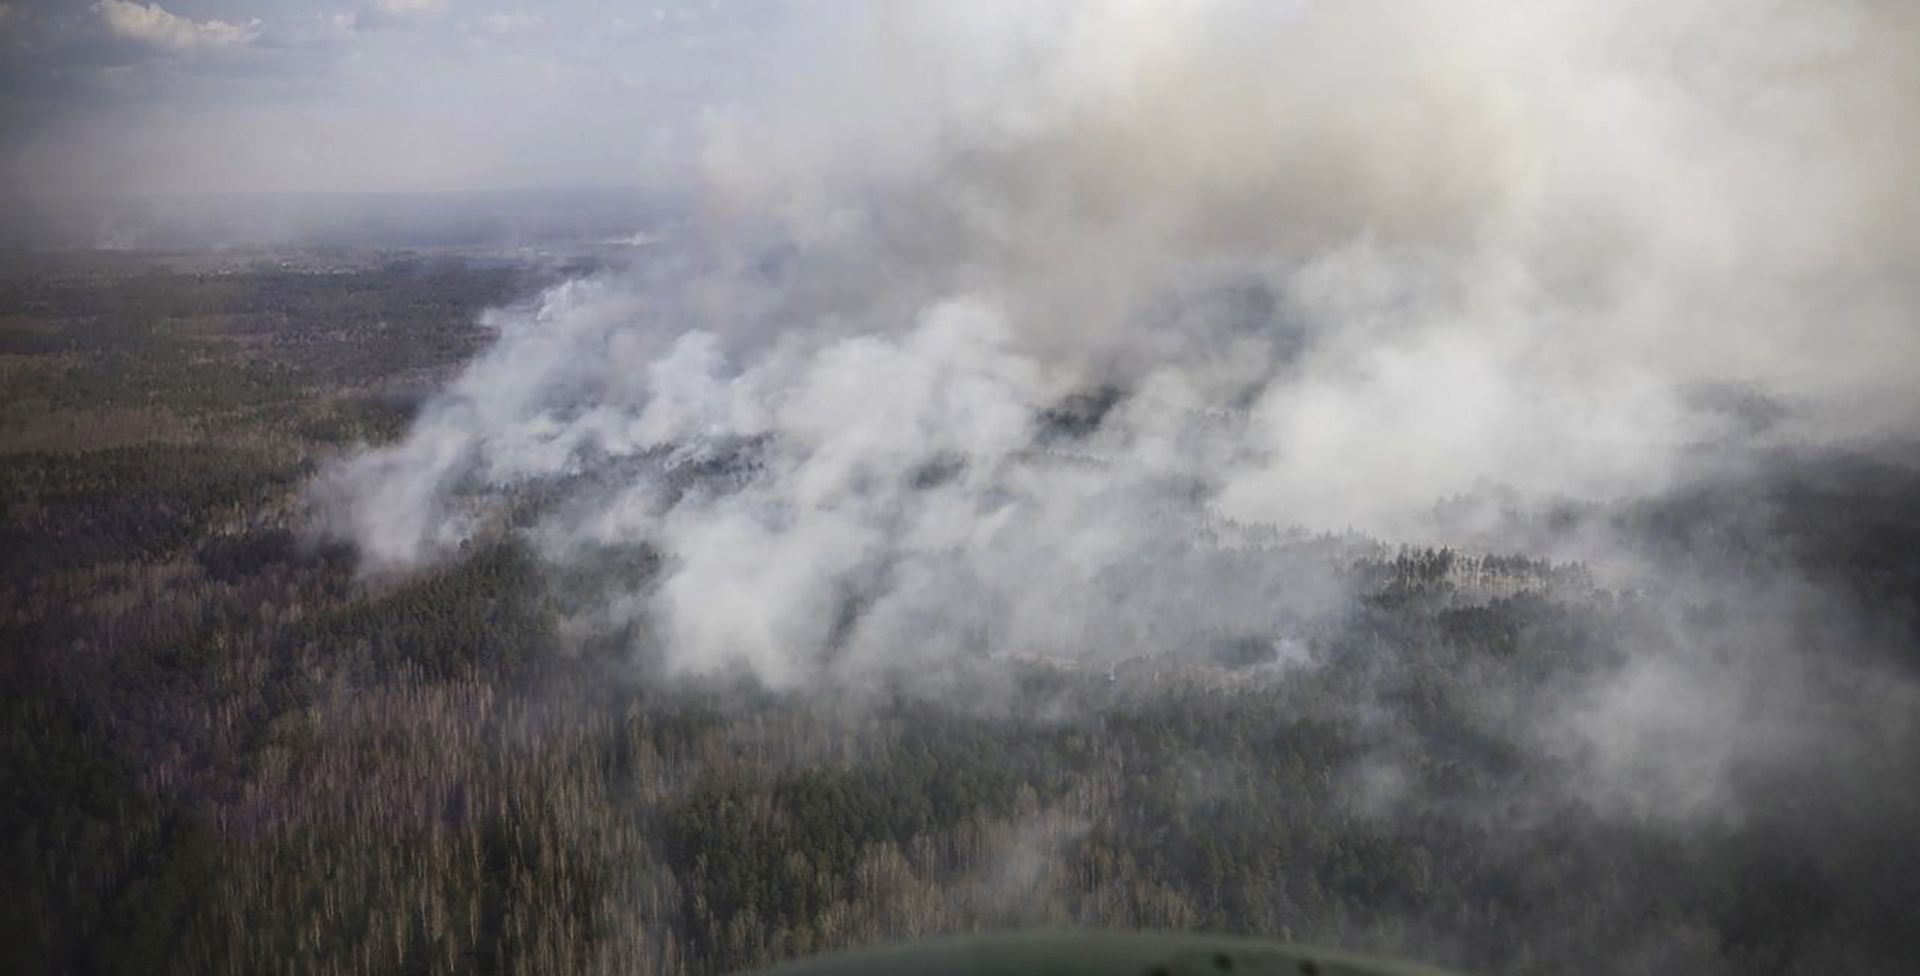 epa08372152 A handout photo made available by the Presidential press service shows a wildfire in Zhytomyr region in Ukraine, 19 April 2020. Wildfires in Zhytomyr region and the Chornobyl exclusion zone broke out on 04 April 2020. Ukraine's Interior Minister Avakov noted that the elimination of fires in the Chornobyl exclusion zone is still ongoing. Now all the causes of fires are being established. So far, rescuers and police are considering snowless winter and dry forest litter as the main course of the wildfires.  EPA/PRESIDENTIAL PRESS SERVICE / HANDOUT  HANDOUT EDITORIAL USE ONLY/NO SALES